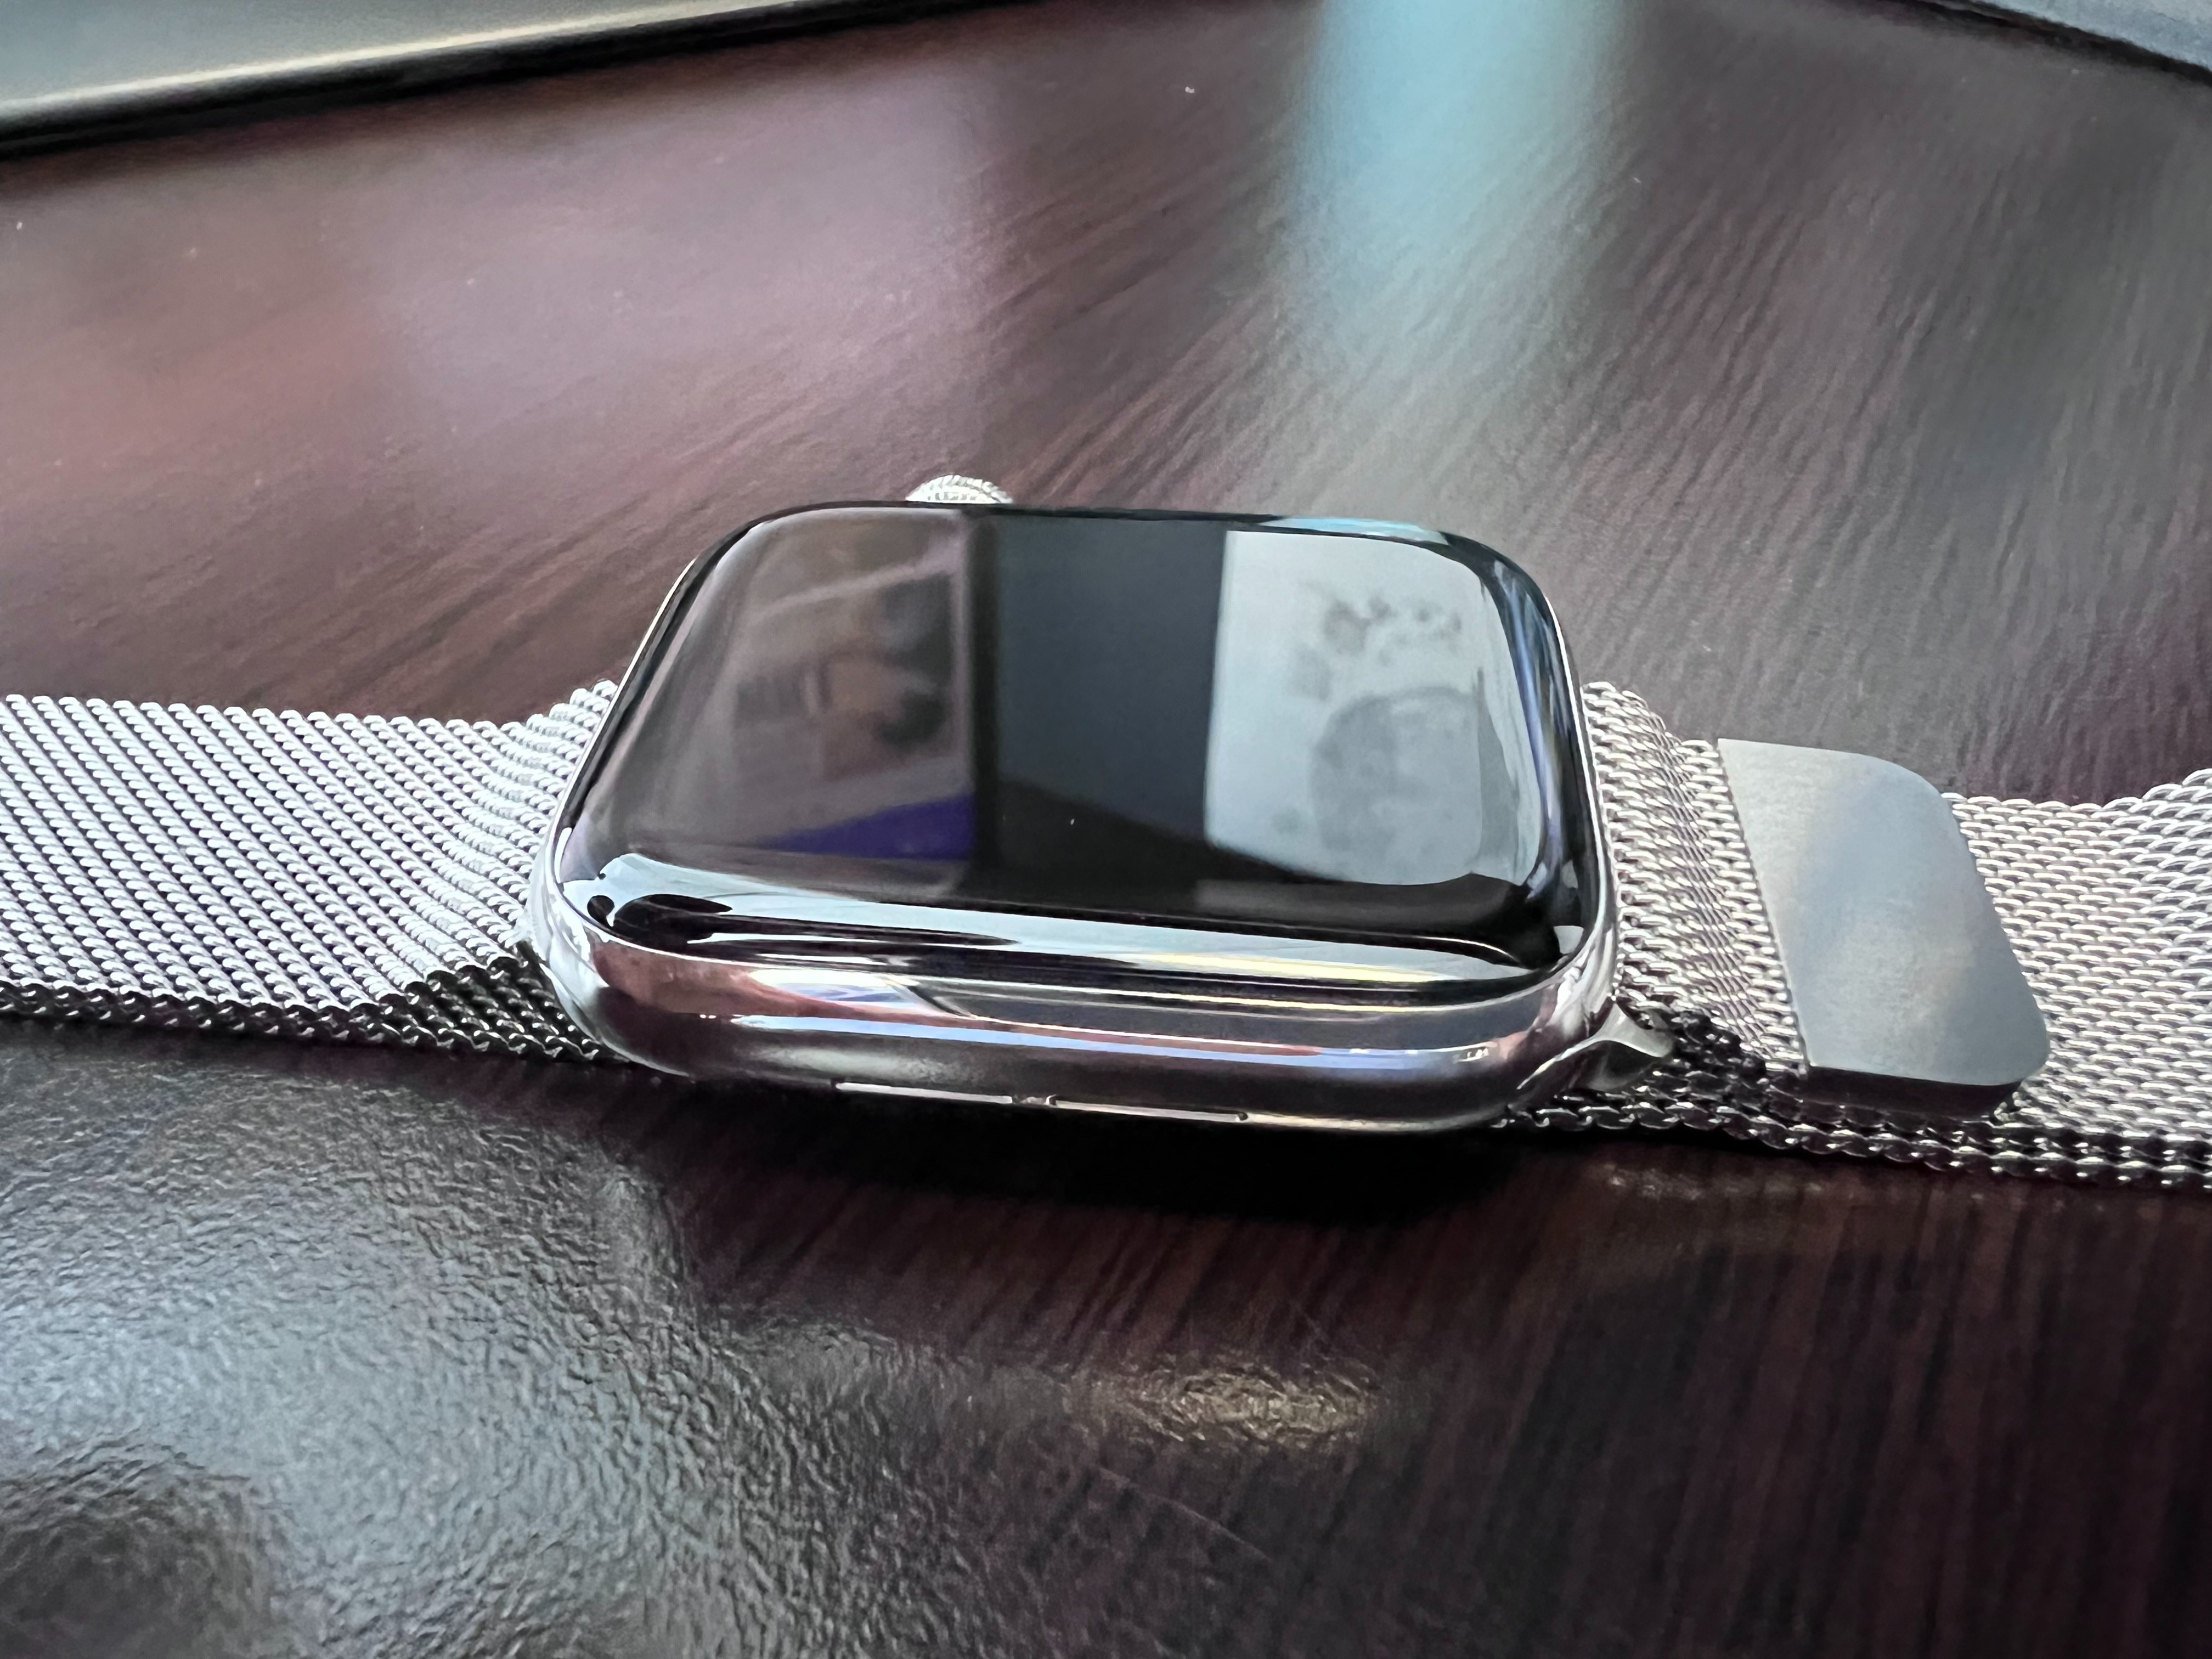 I SCRATCHED MY NEW SAPPHIRE APPLE WATCH! 